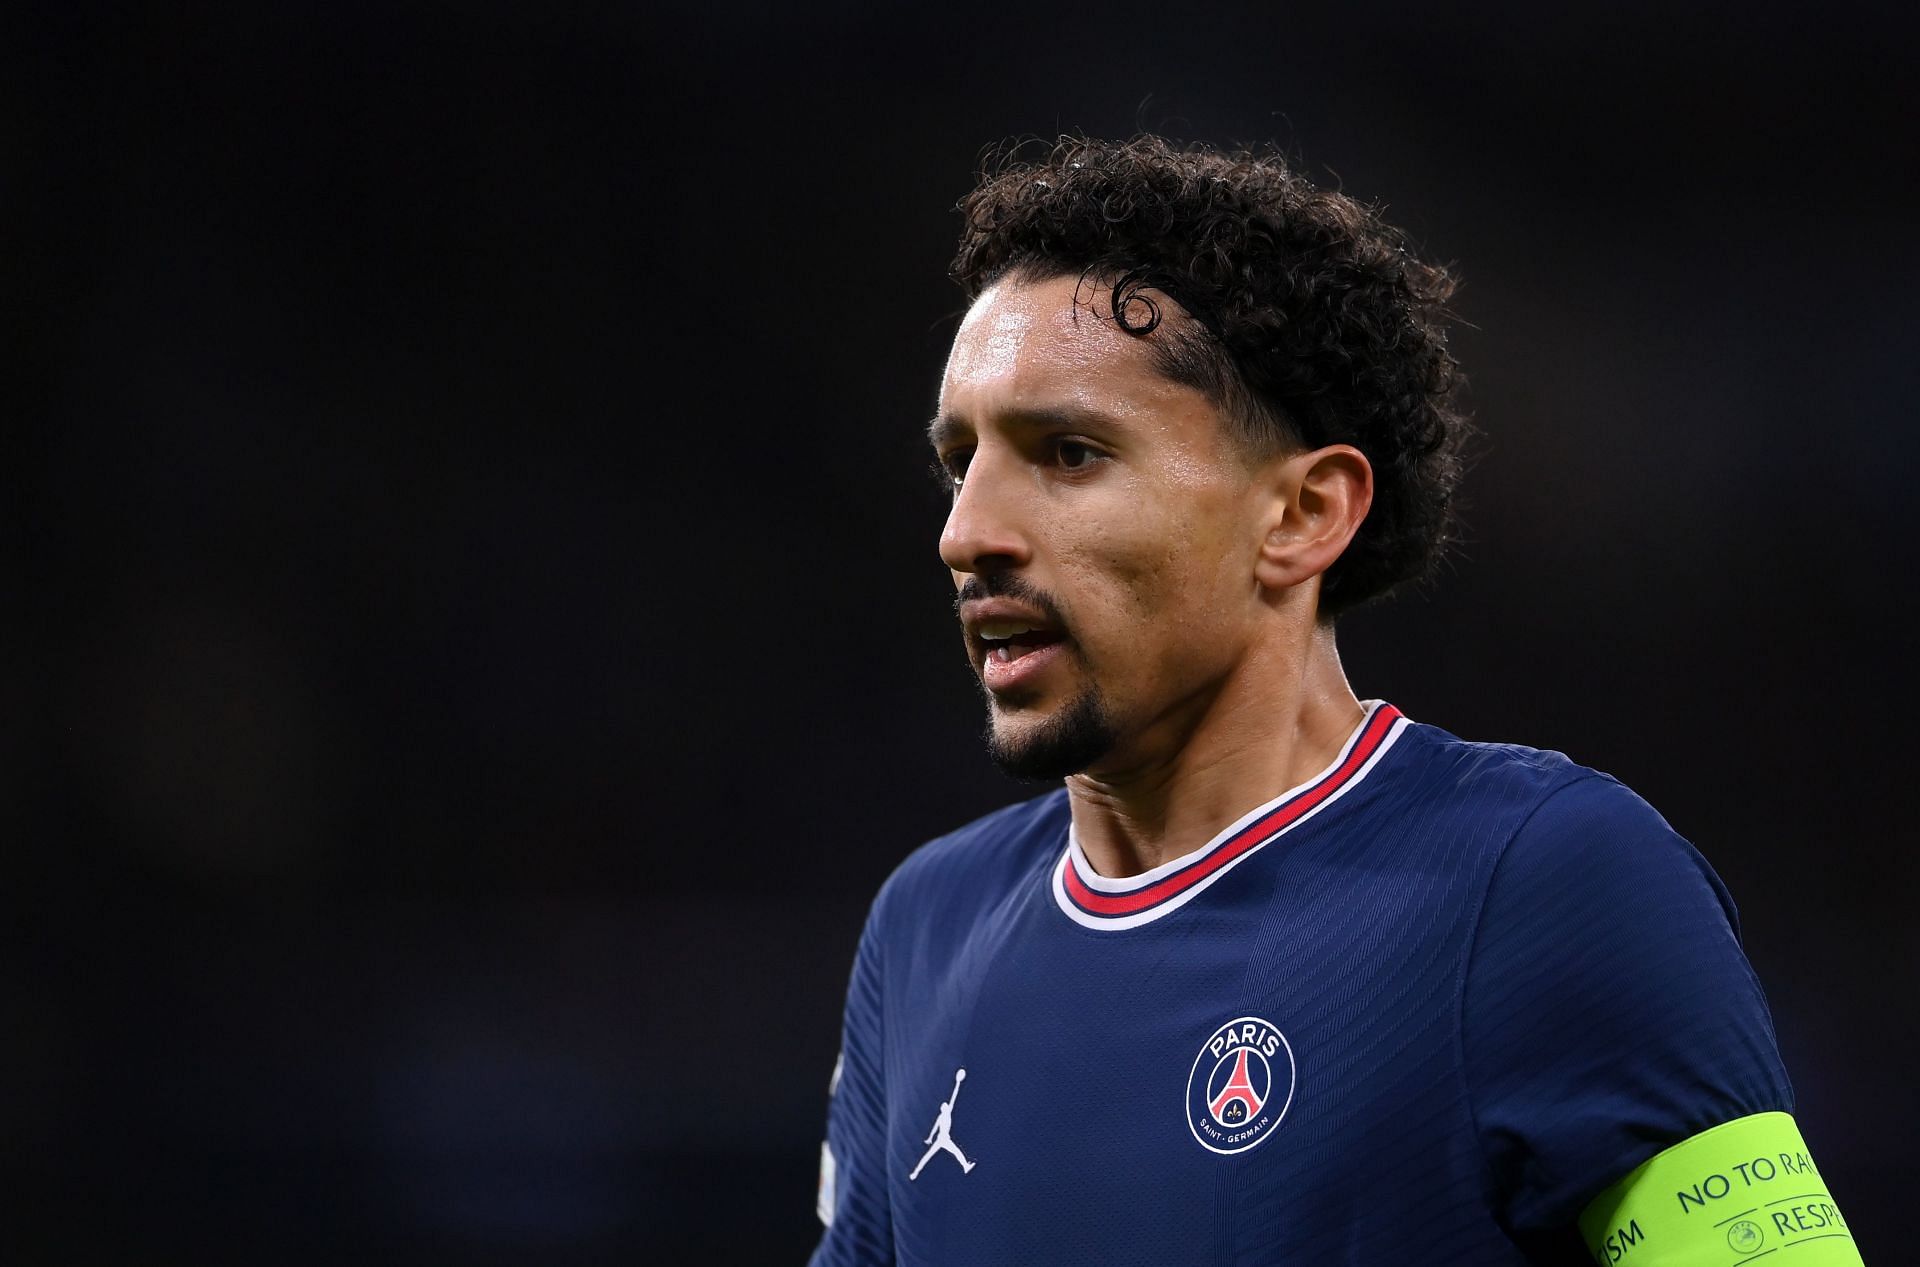 PSG are preparing a new contract for Marquinhos.